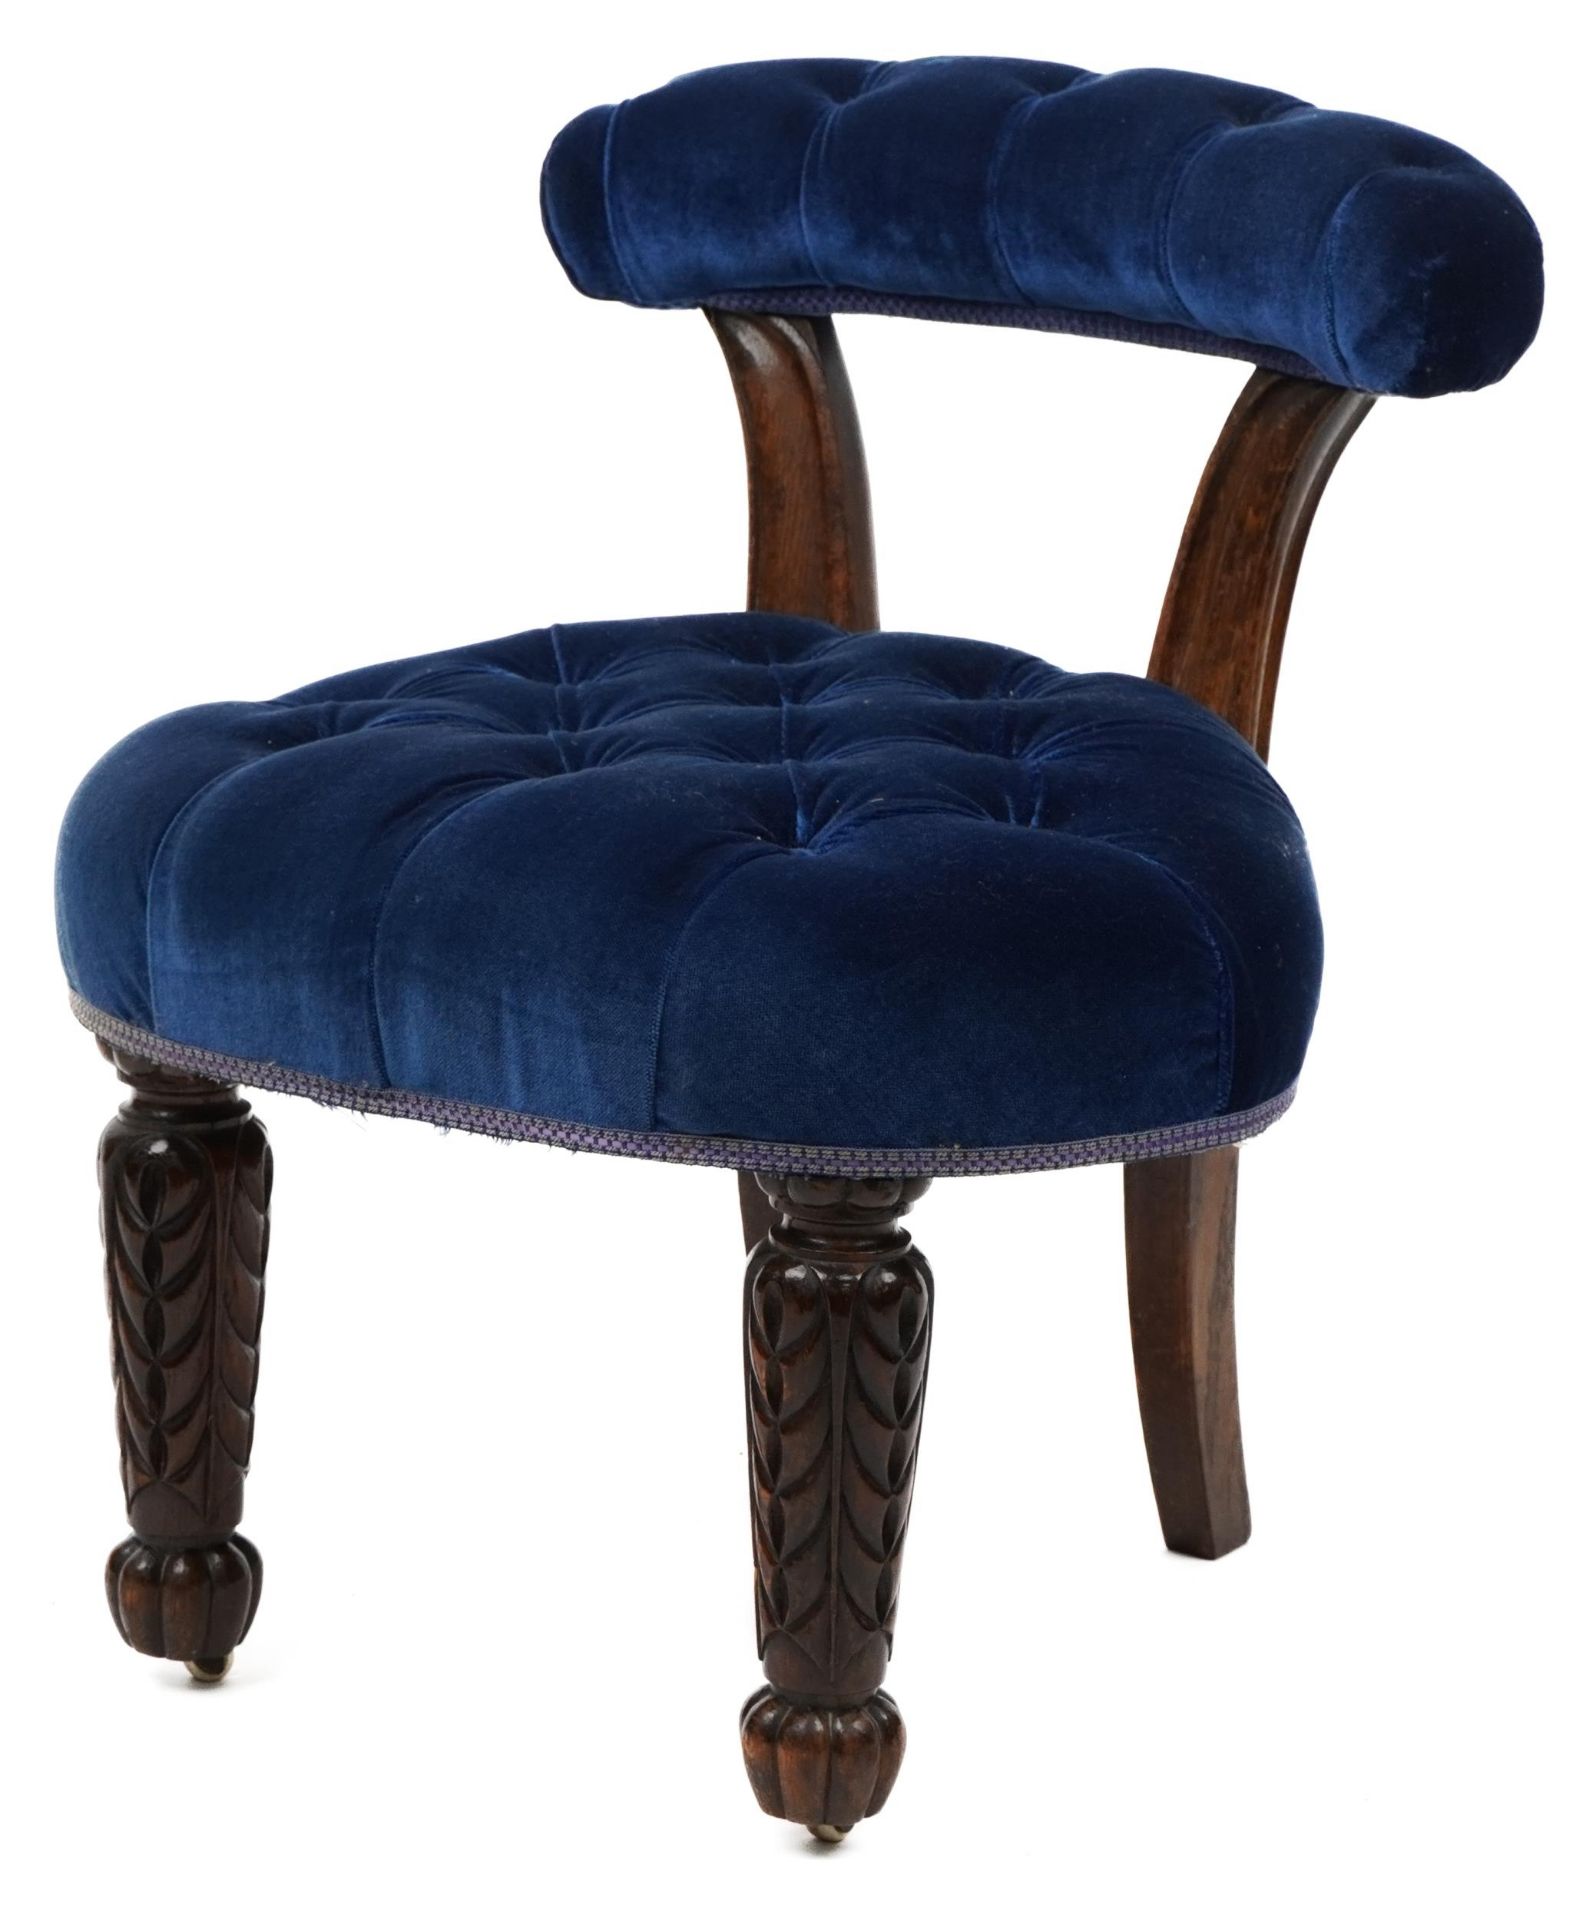 Victorian carved oak bedroom chair with blue button back upholstery, 64cm high : For further